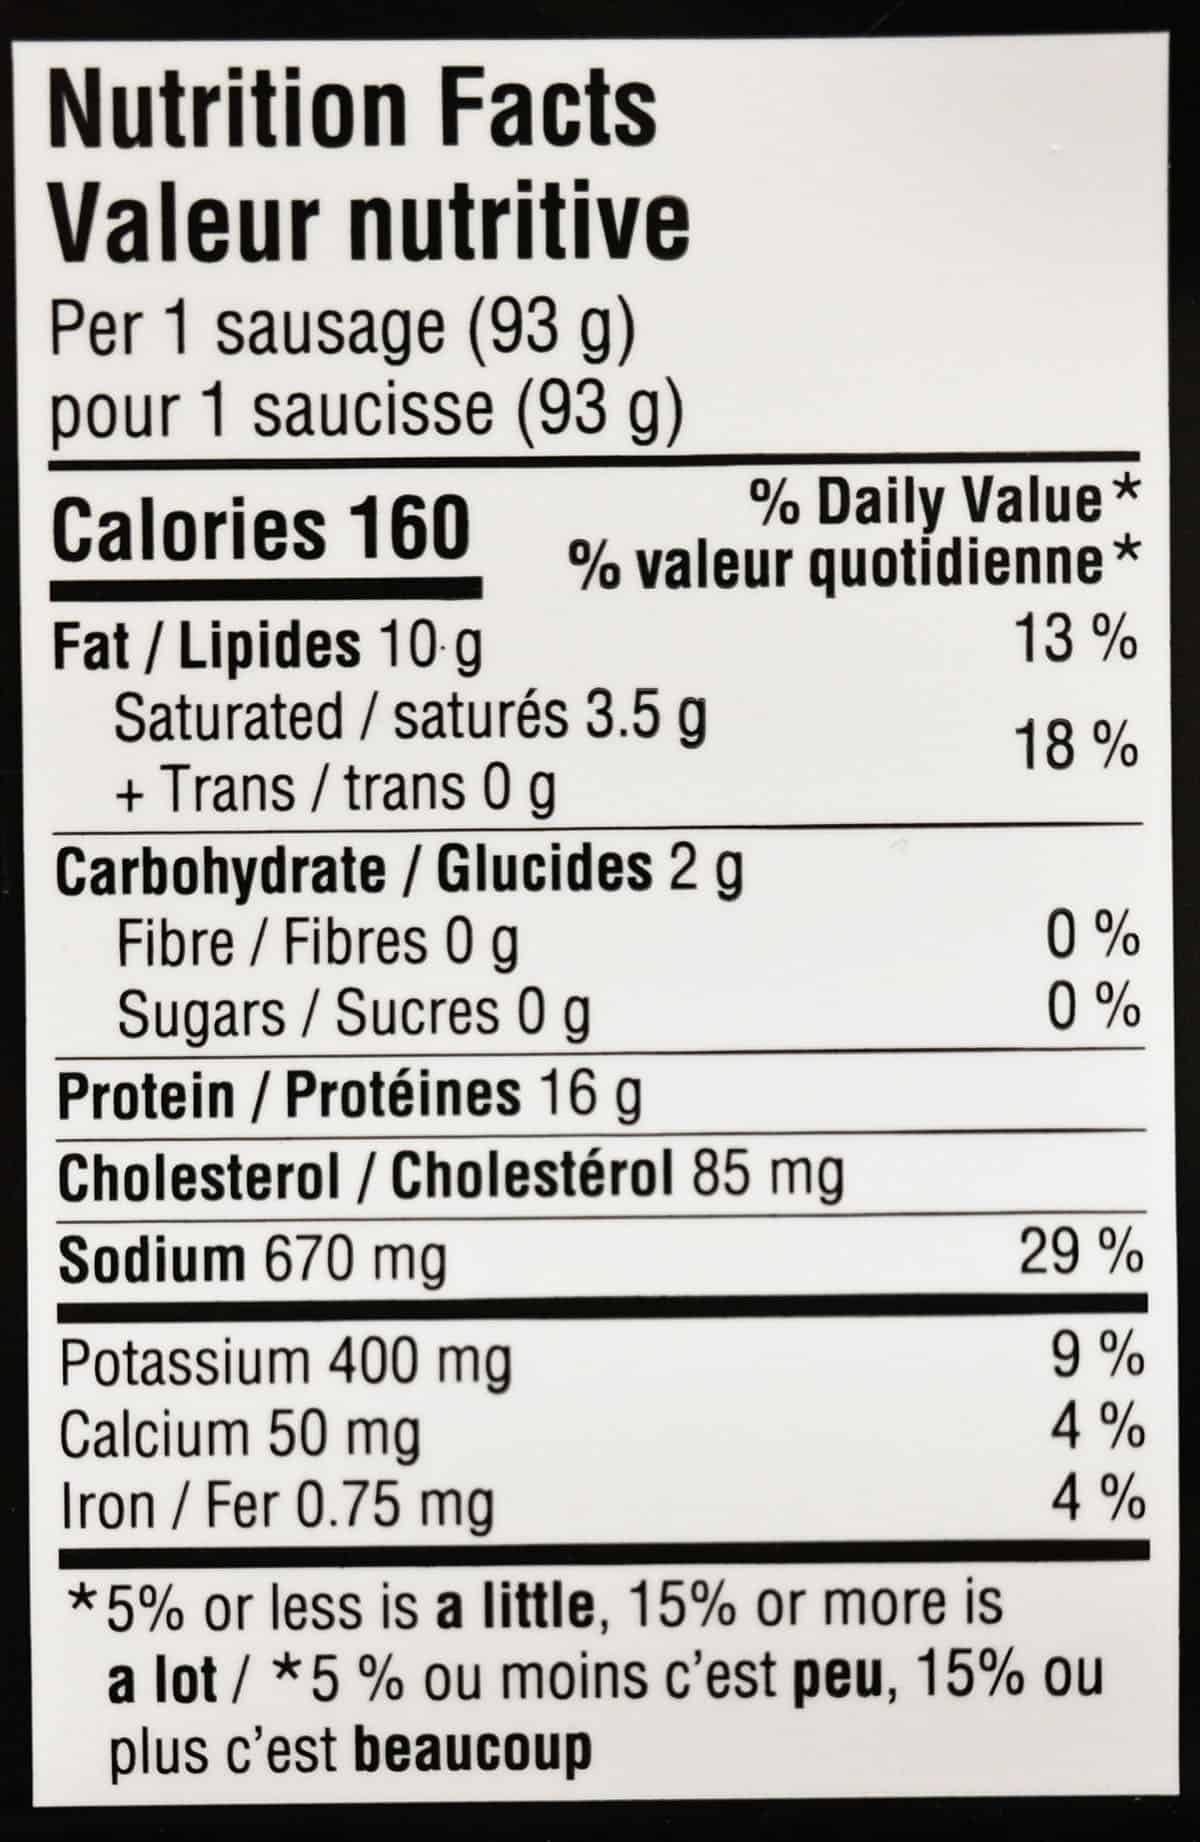 Nutrition facts label from the package.